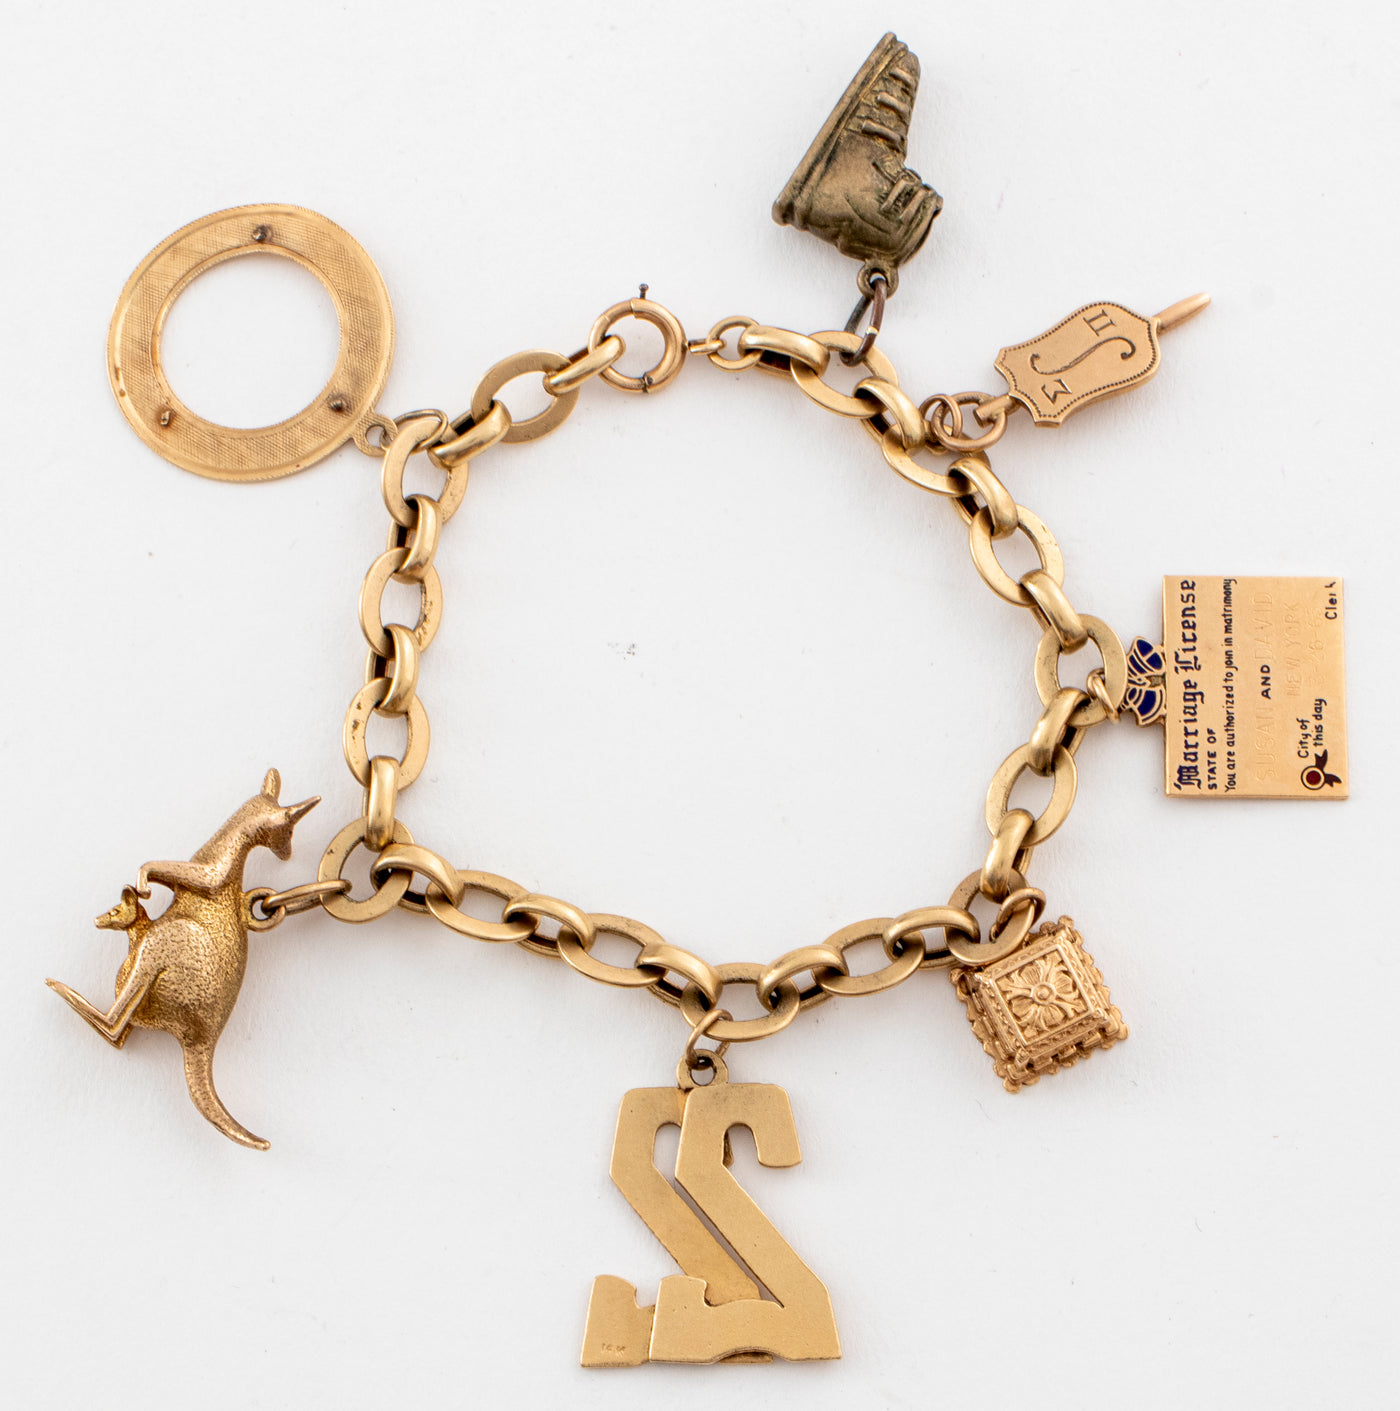 14K gold charm bracelet with 14K gold charms, 34.7 gr. sold at auction on  17th August | Bidsquare